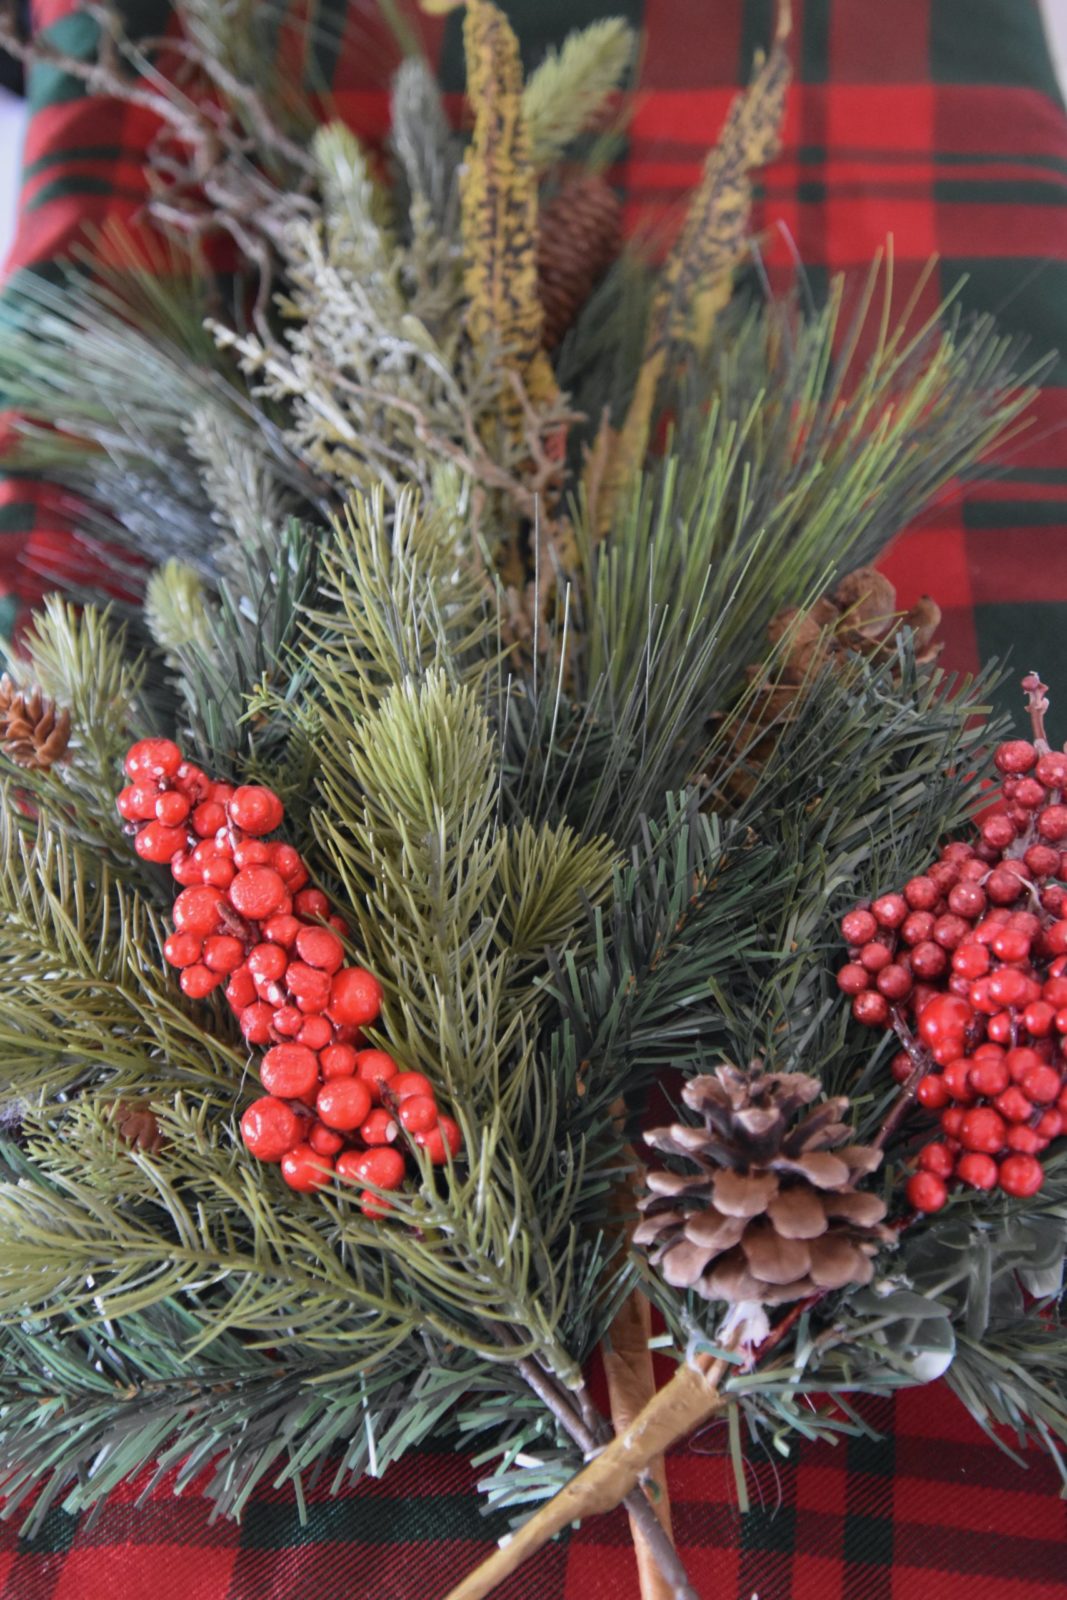 Amy Grisak's Christmas decorating tips